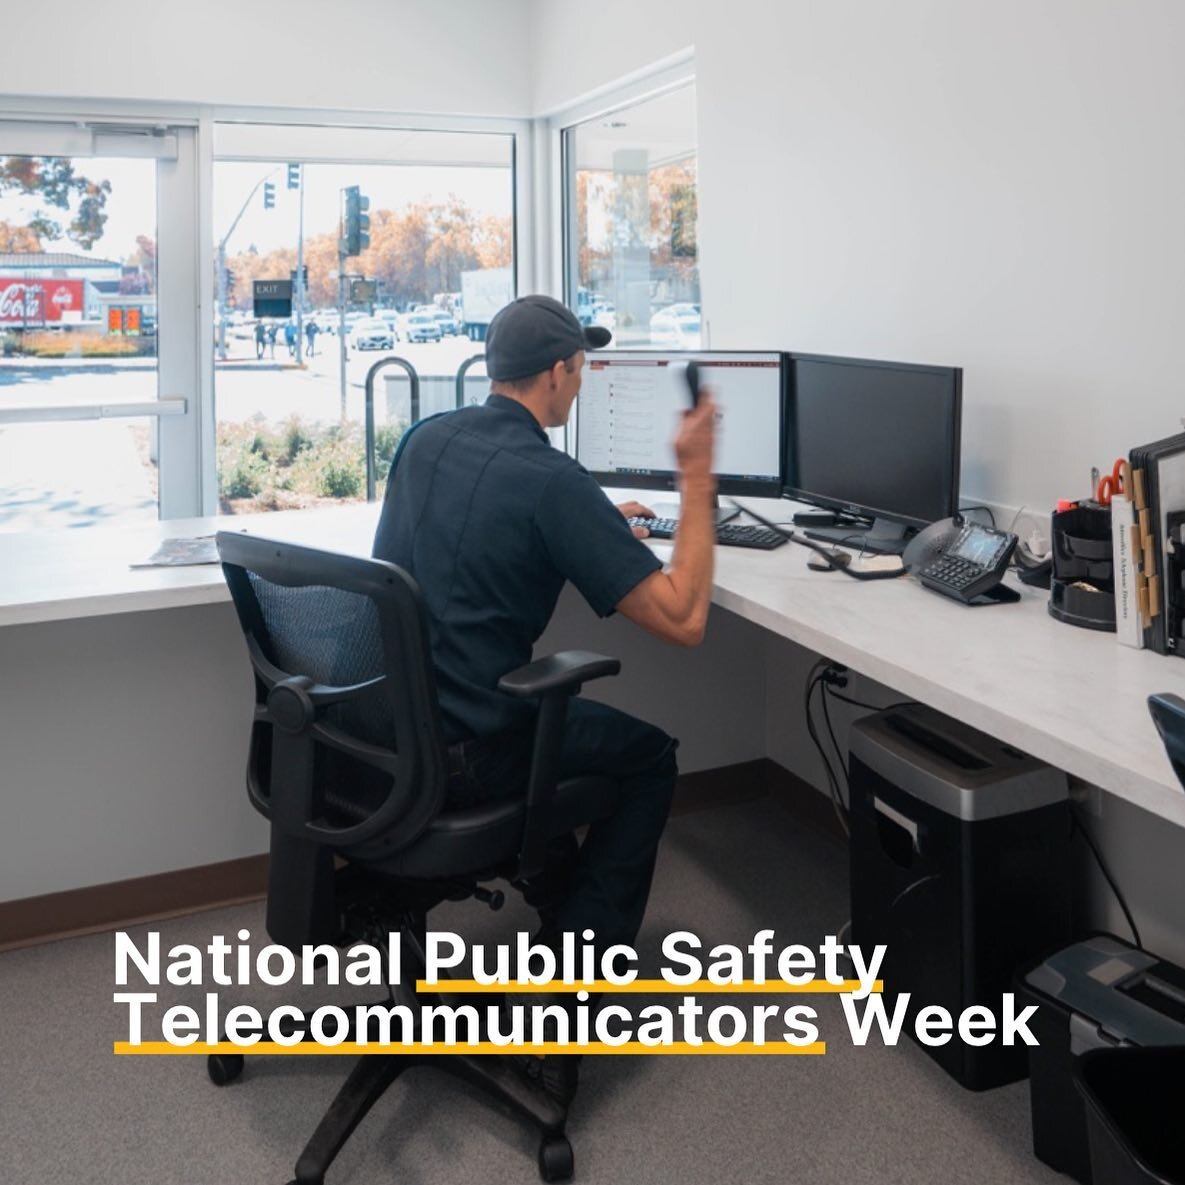 Sending a big thank you to all dispatchers and public safety telecommunicators! As the first line of action in emergency situations, these first responders play such a critical role in the safety of our communities. Thank you to these voices who prov